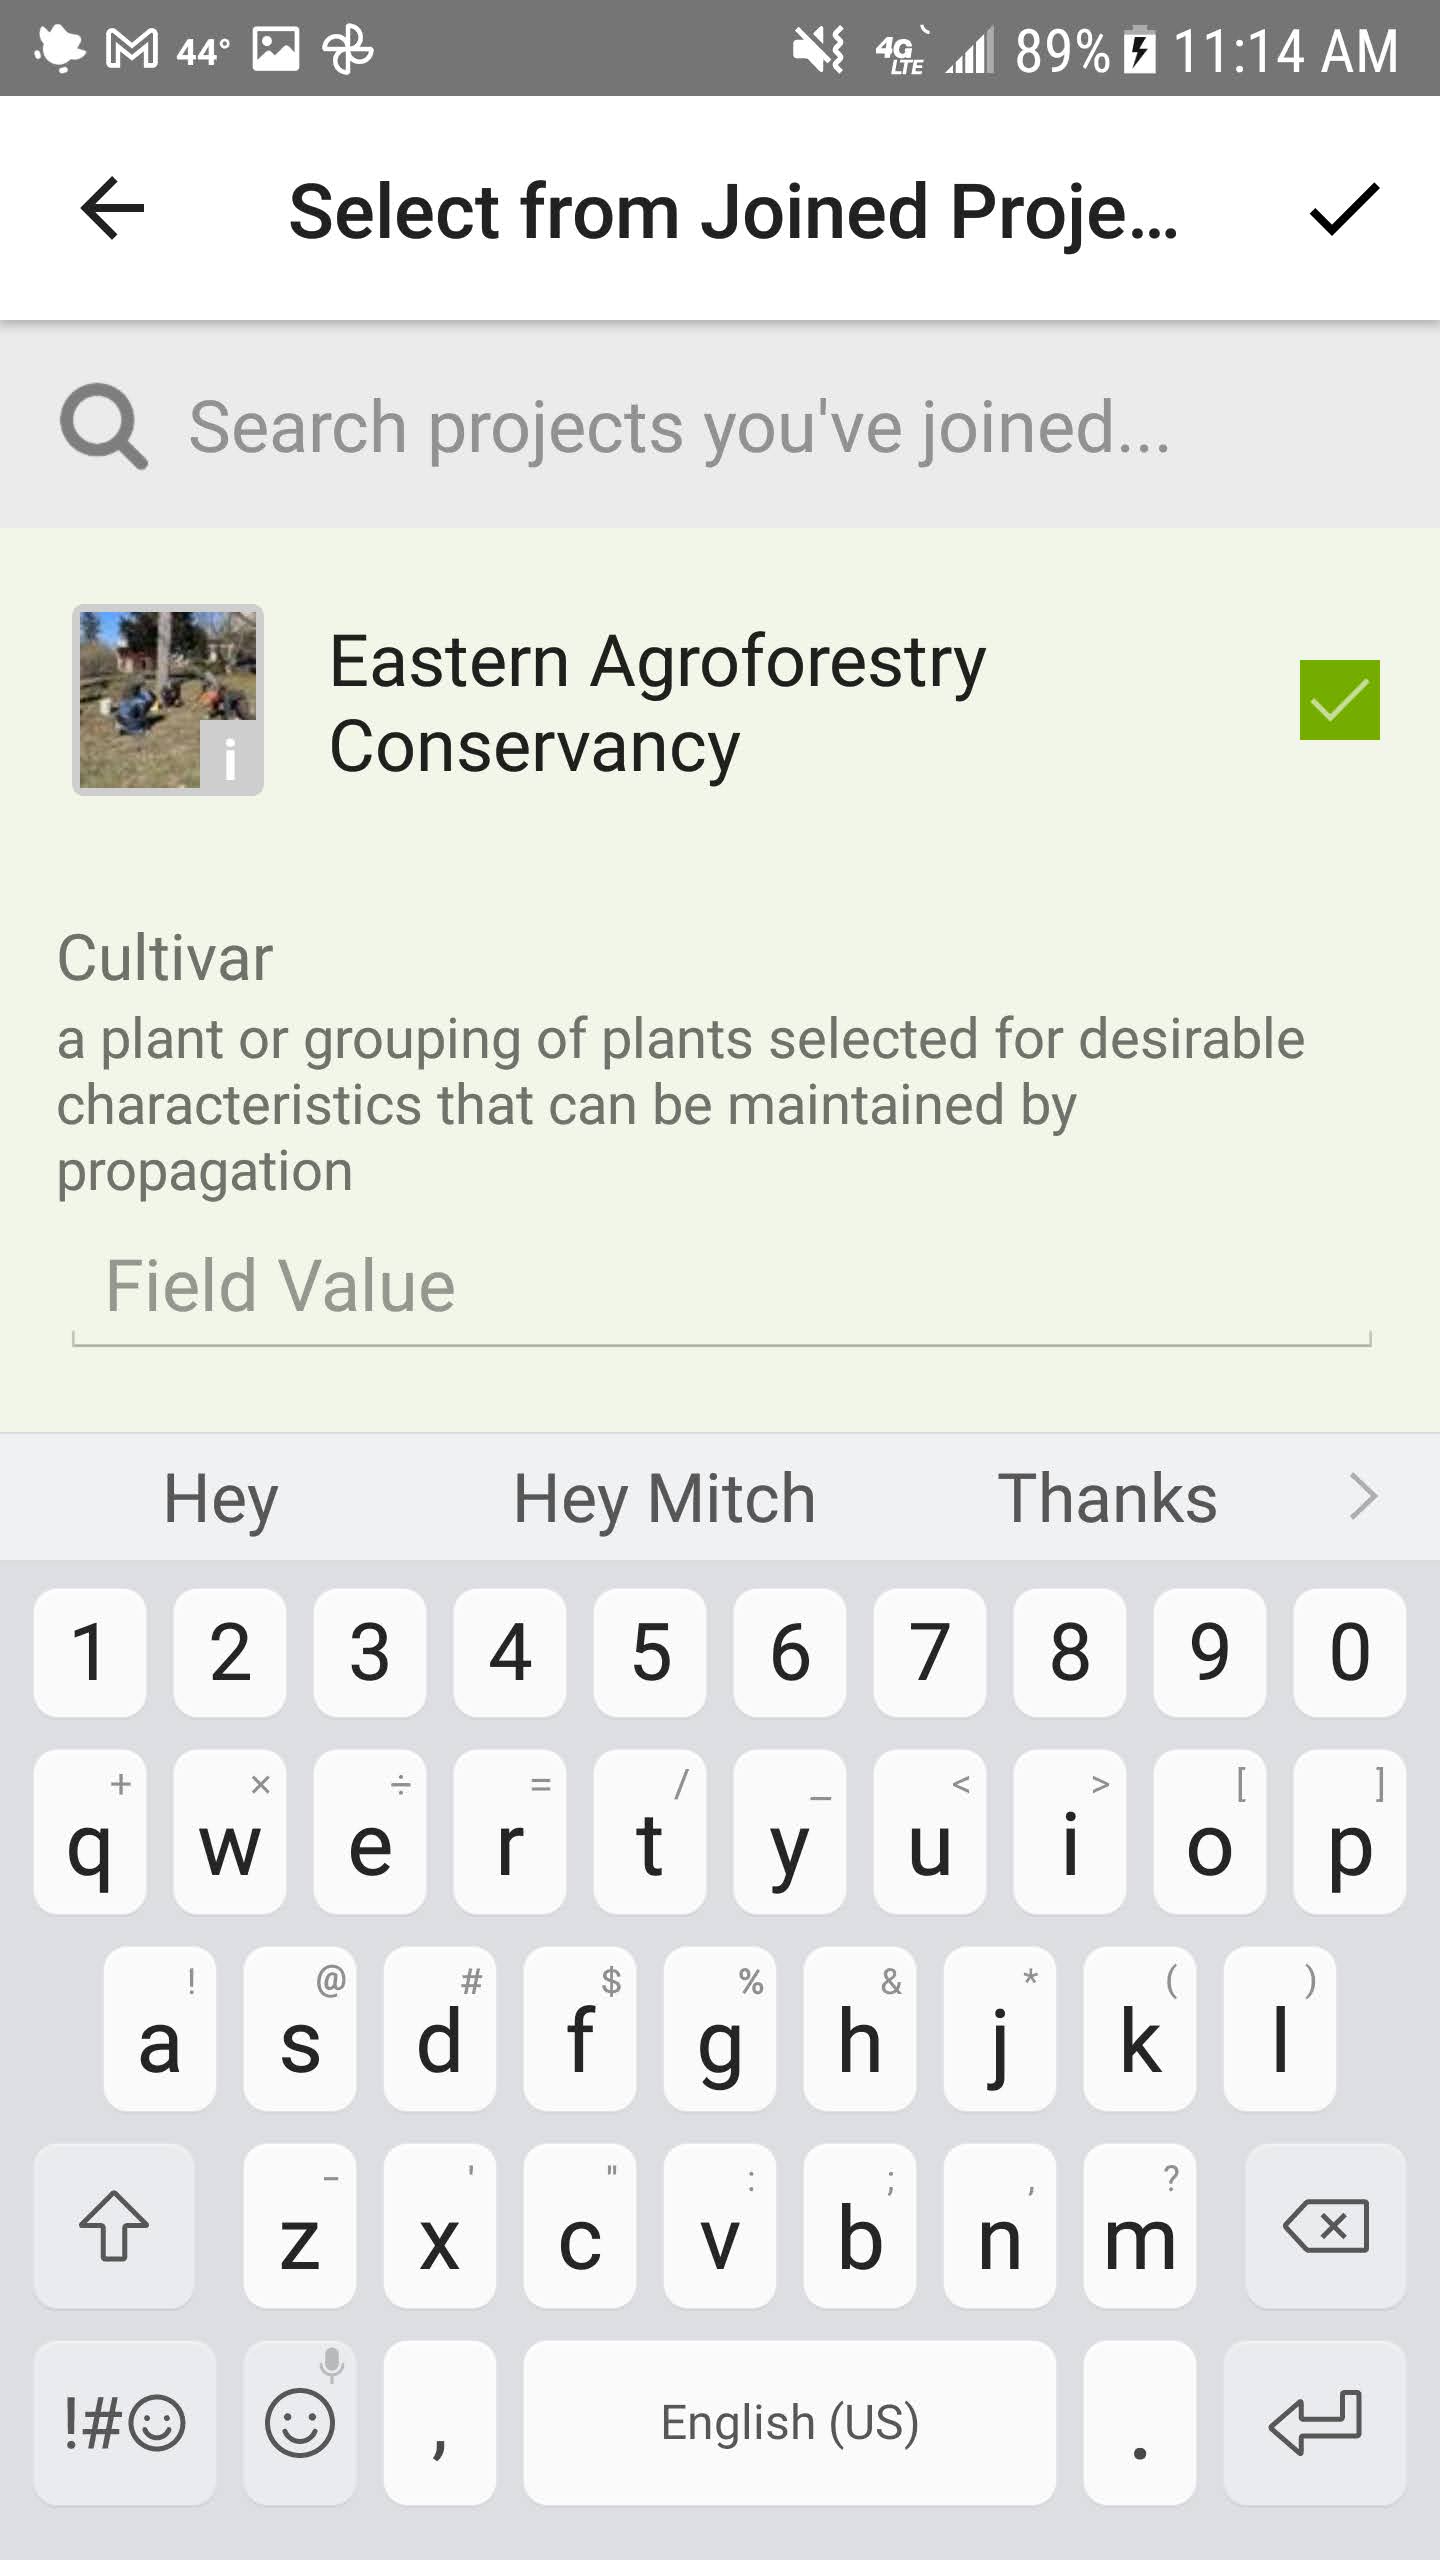 iNaturalist app after selecting a project to add an observation to.